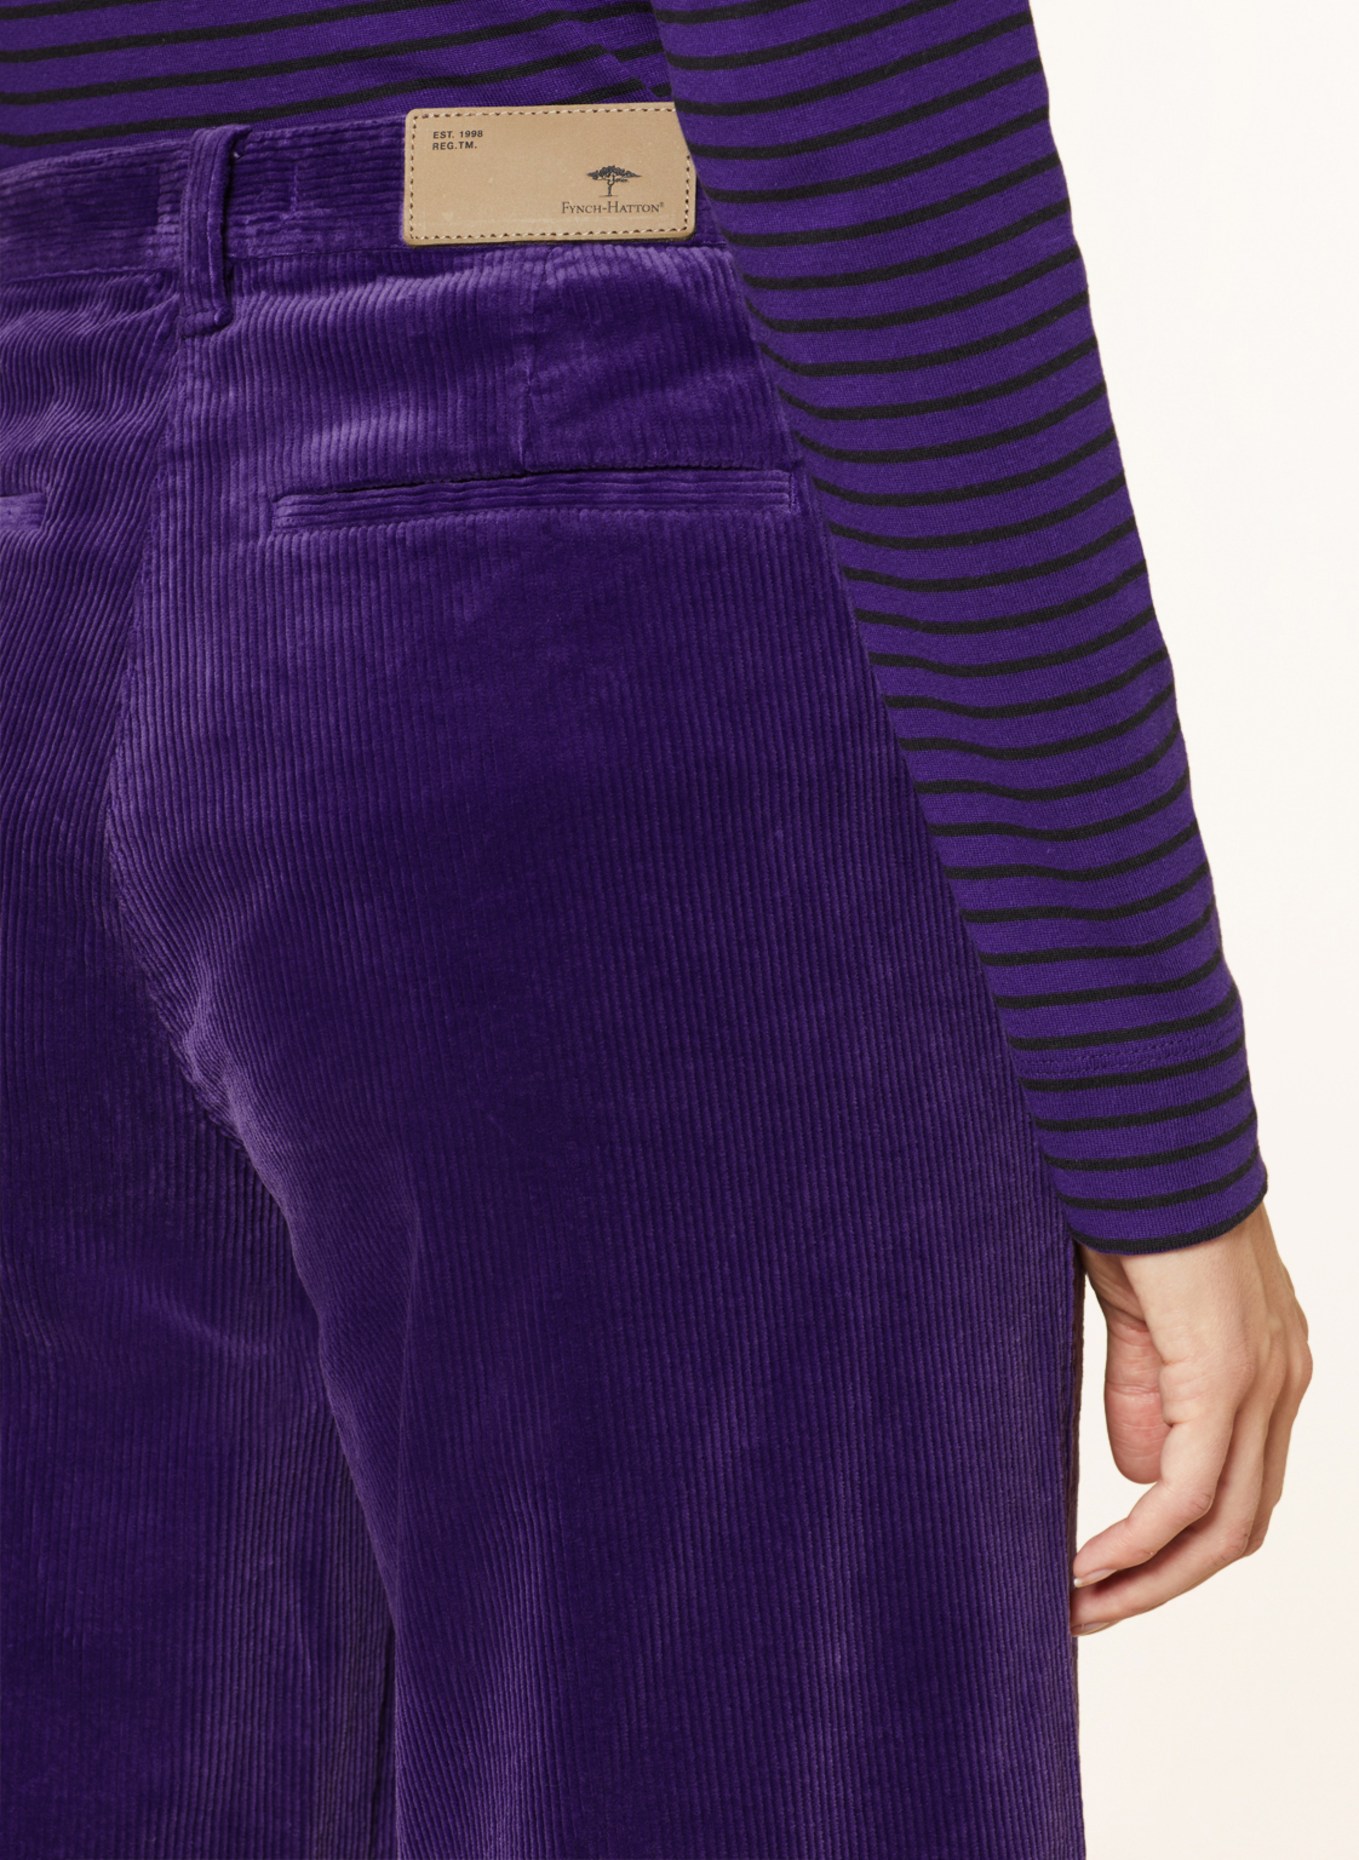 FYNCH-HATTON Wide leg trousers made of corduroy, Color: PURPLE (Image 5)